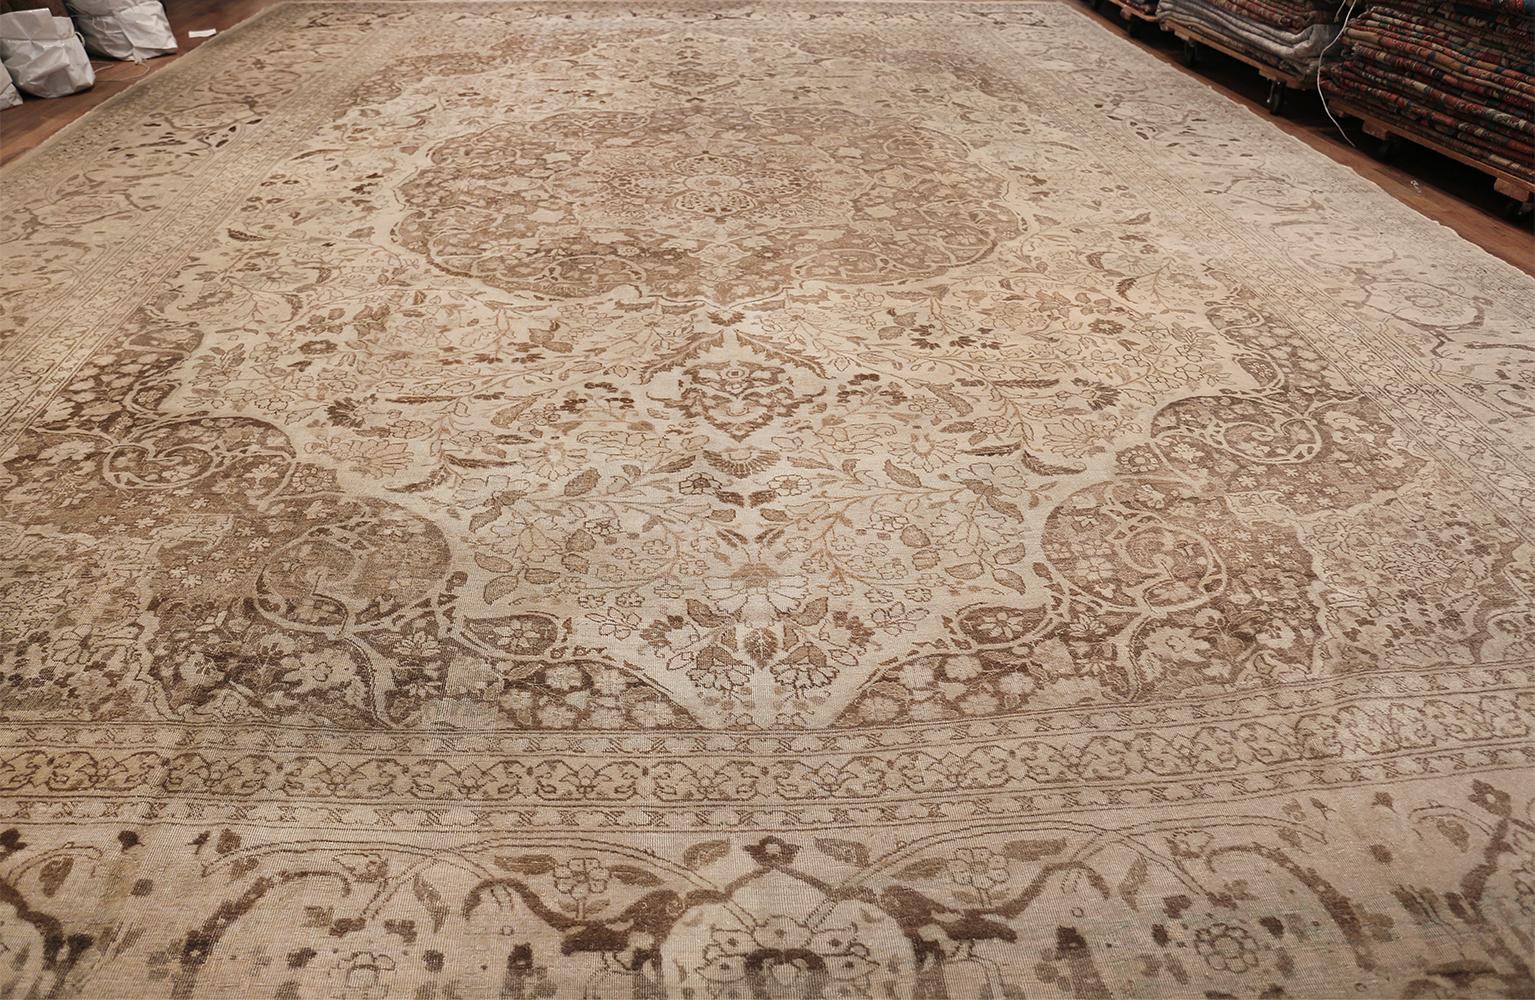 Beautiful large oversized antique Persian Tabriz rug, Country of Origin: Persia, circa 1900. Size: 16 ft x 23 ft (4.88 m x 7.01 m)

The earthy browns and delicate ivory of this Tabriz carpet from around the turn of the 20th century create a piece